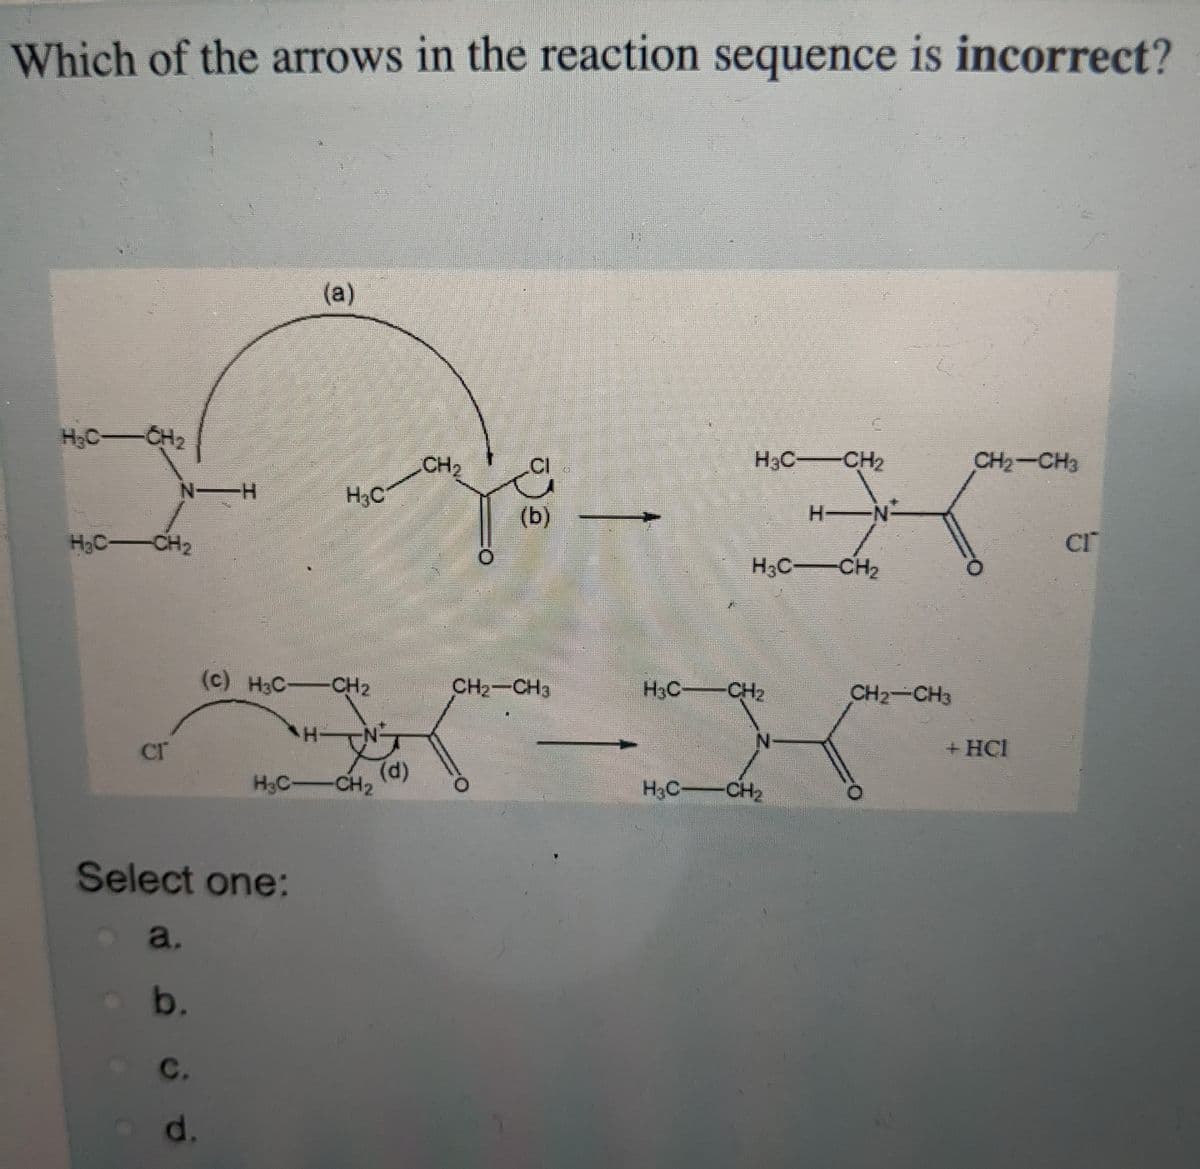 Which of the arrows in the reaction sequence is incorrect?
(a)
H,C-
CH2
CH2
.CI
H3C CH2
CH2-CH3
H3C
(b)
H-
H N-
CH2
CI
H3C CH2
(c) H3C-CH2
CH2-CH3
H3C:
CH2
CH2-CH3
cr
+ HCI
H3C
(d)
CH2
H3C-CH2
Select one:
a.
b.
с.
d.
